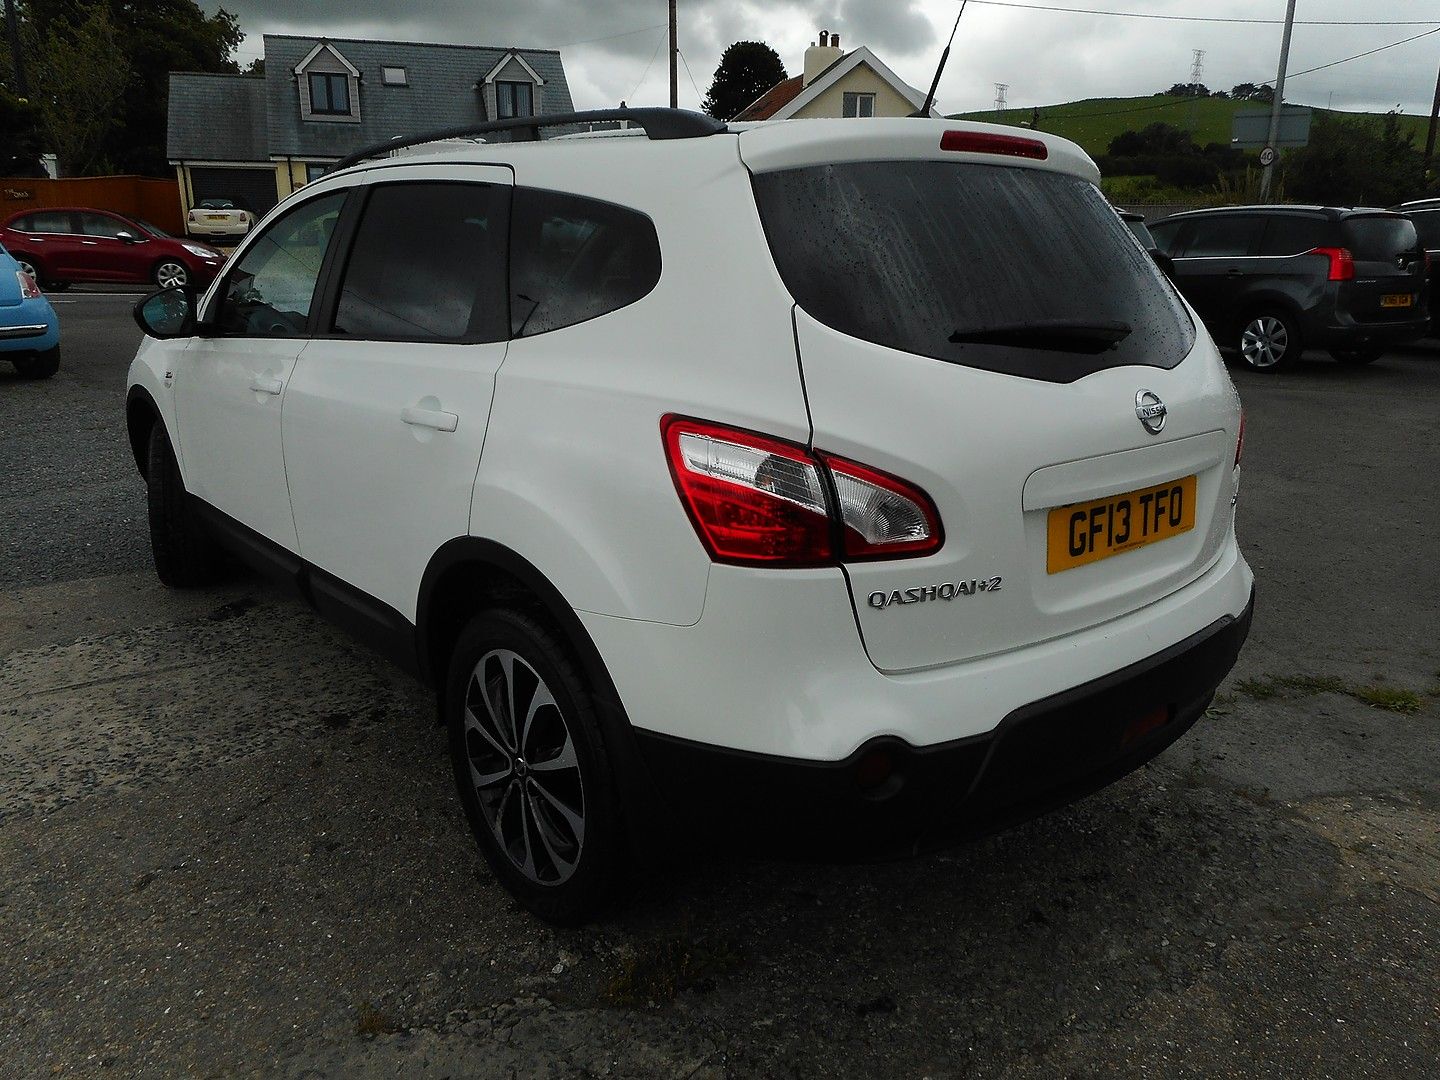 NISSAN QASHQAI 360 1.5 dCi 7 SEATER (2013) - Picture 4